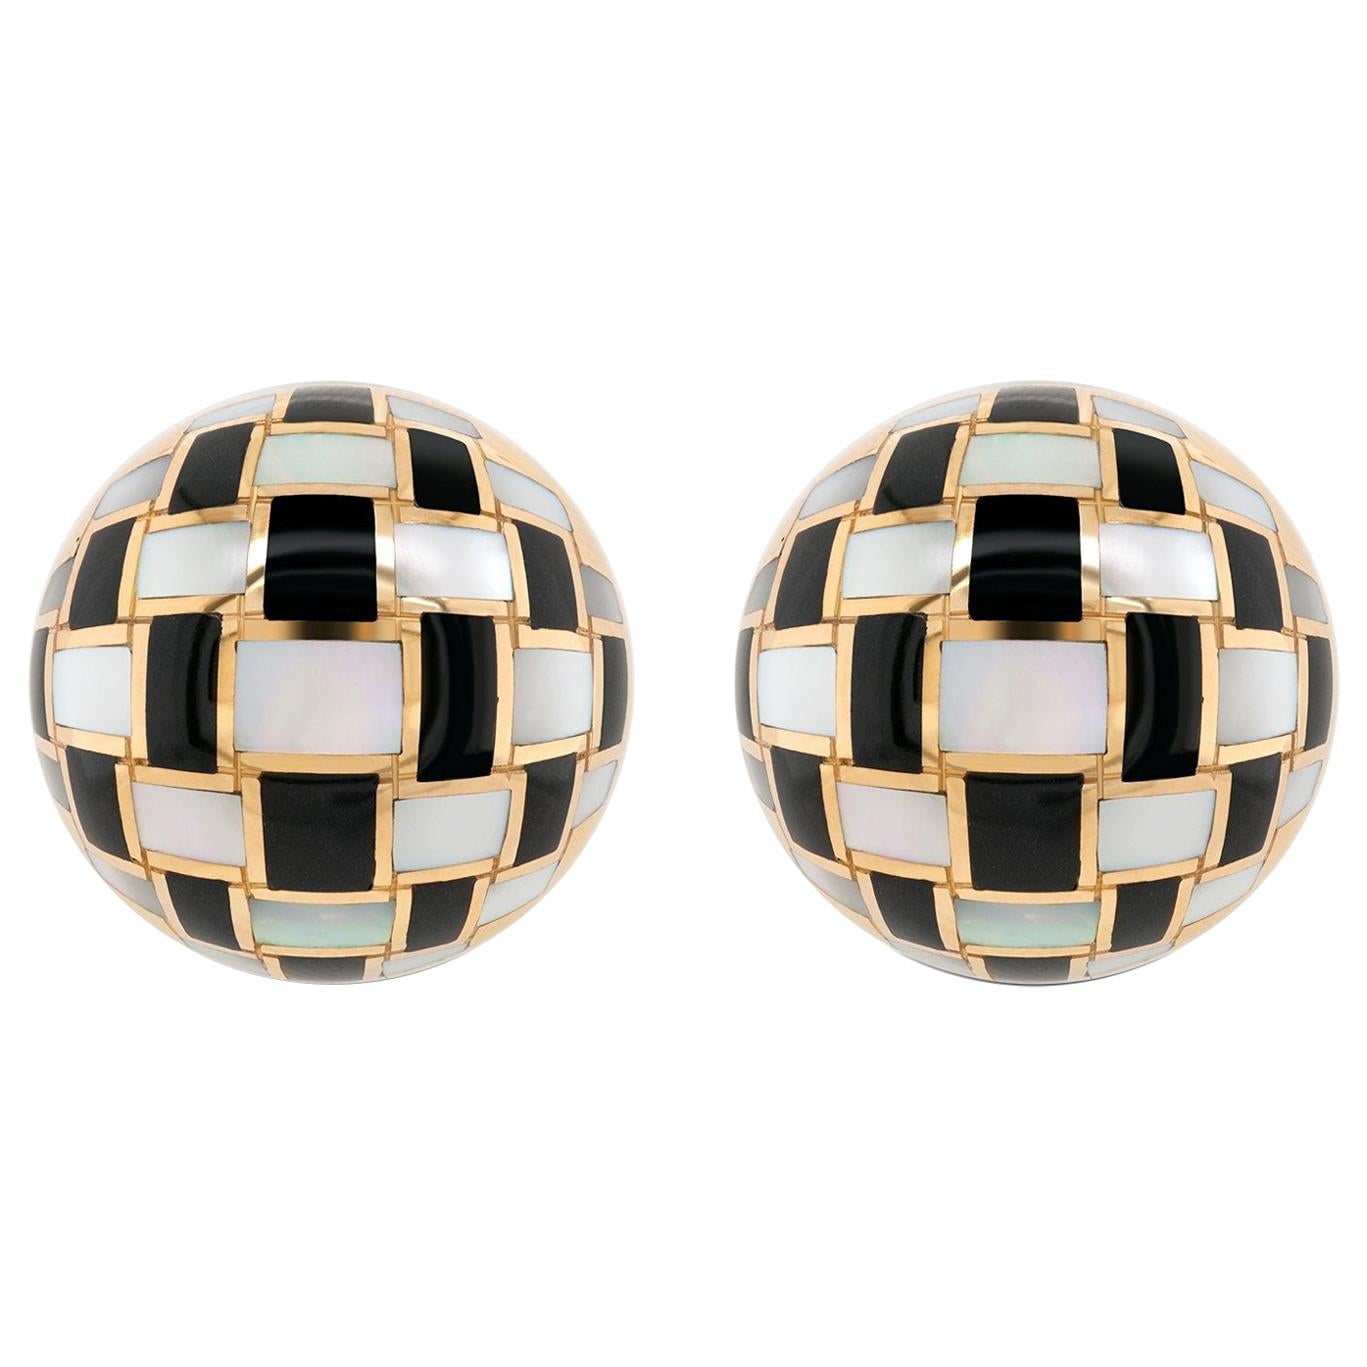 Tiffany & Co. Onyx and Mother of Pearl Checkerboard Earrings in 18 Karat Gold